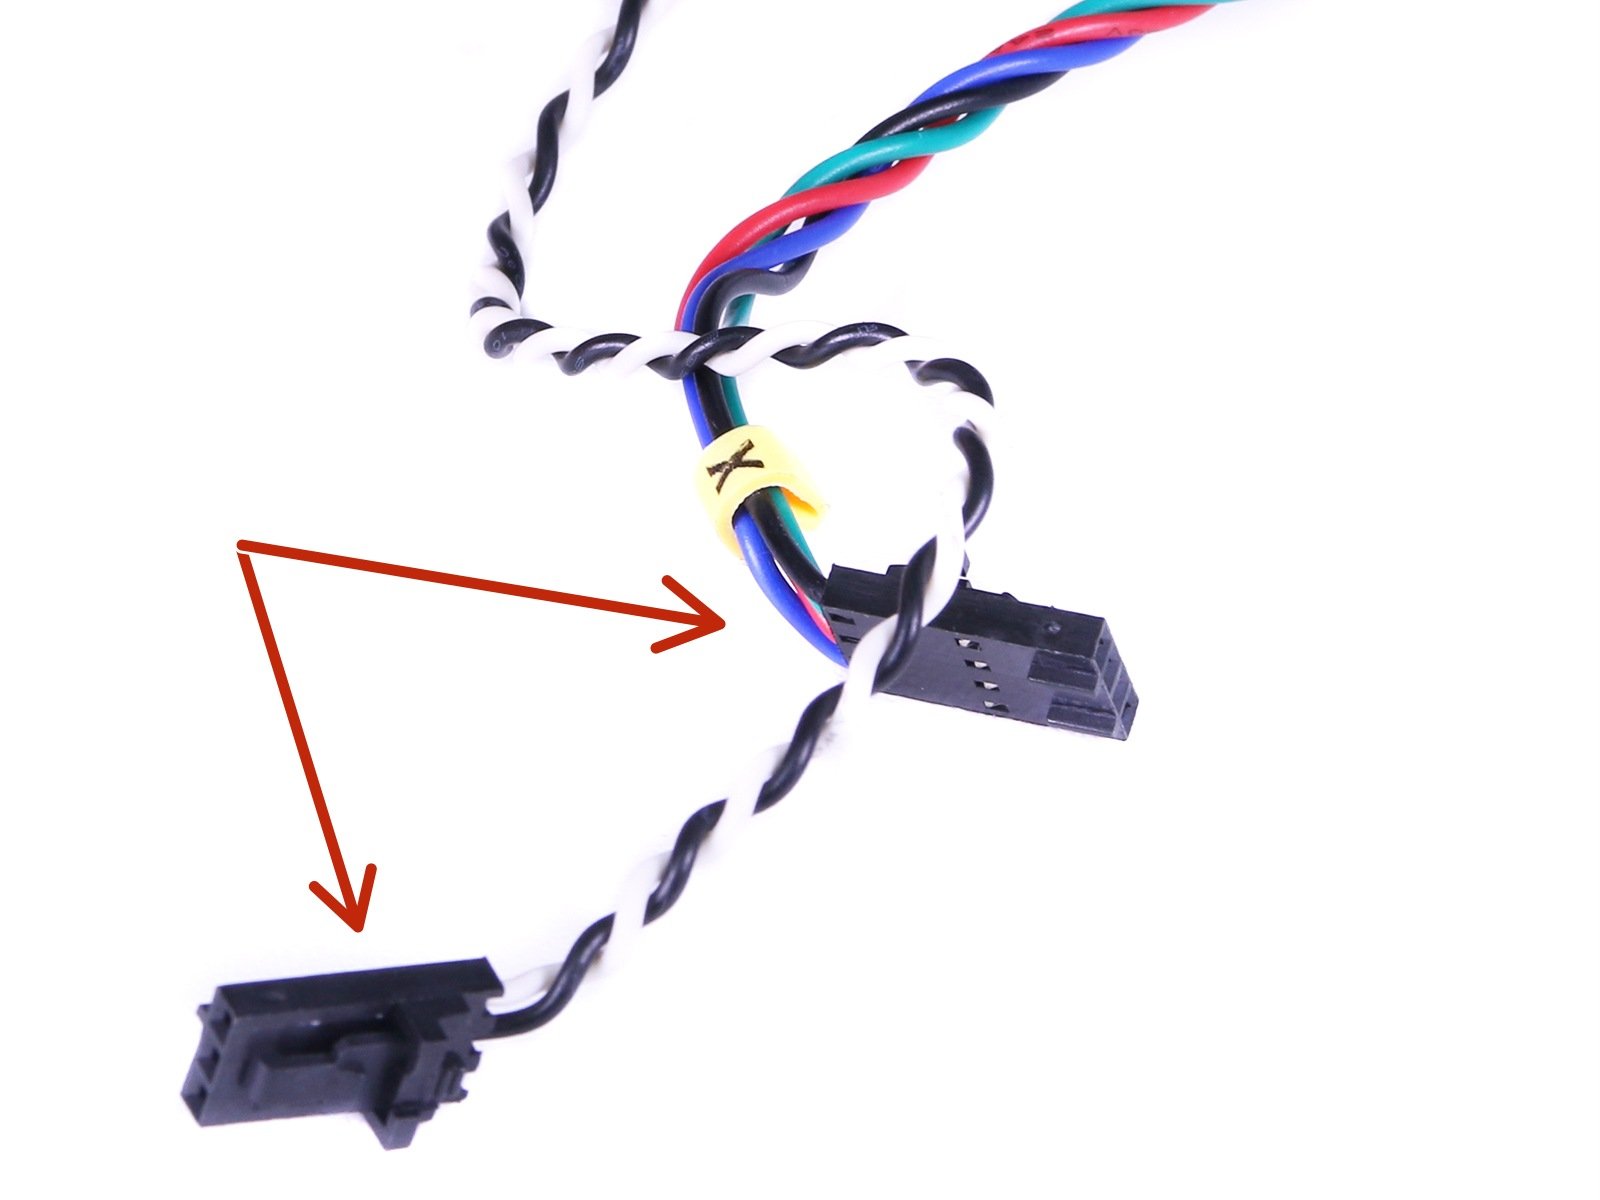 X-axis: Removing the motor cables